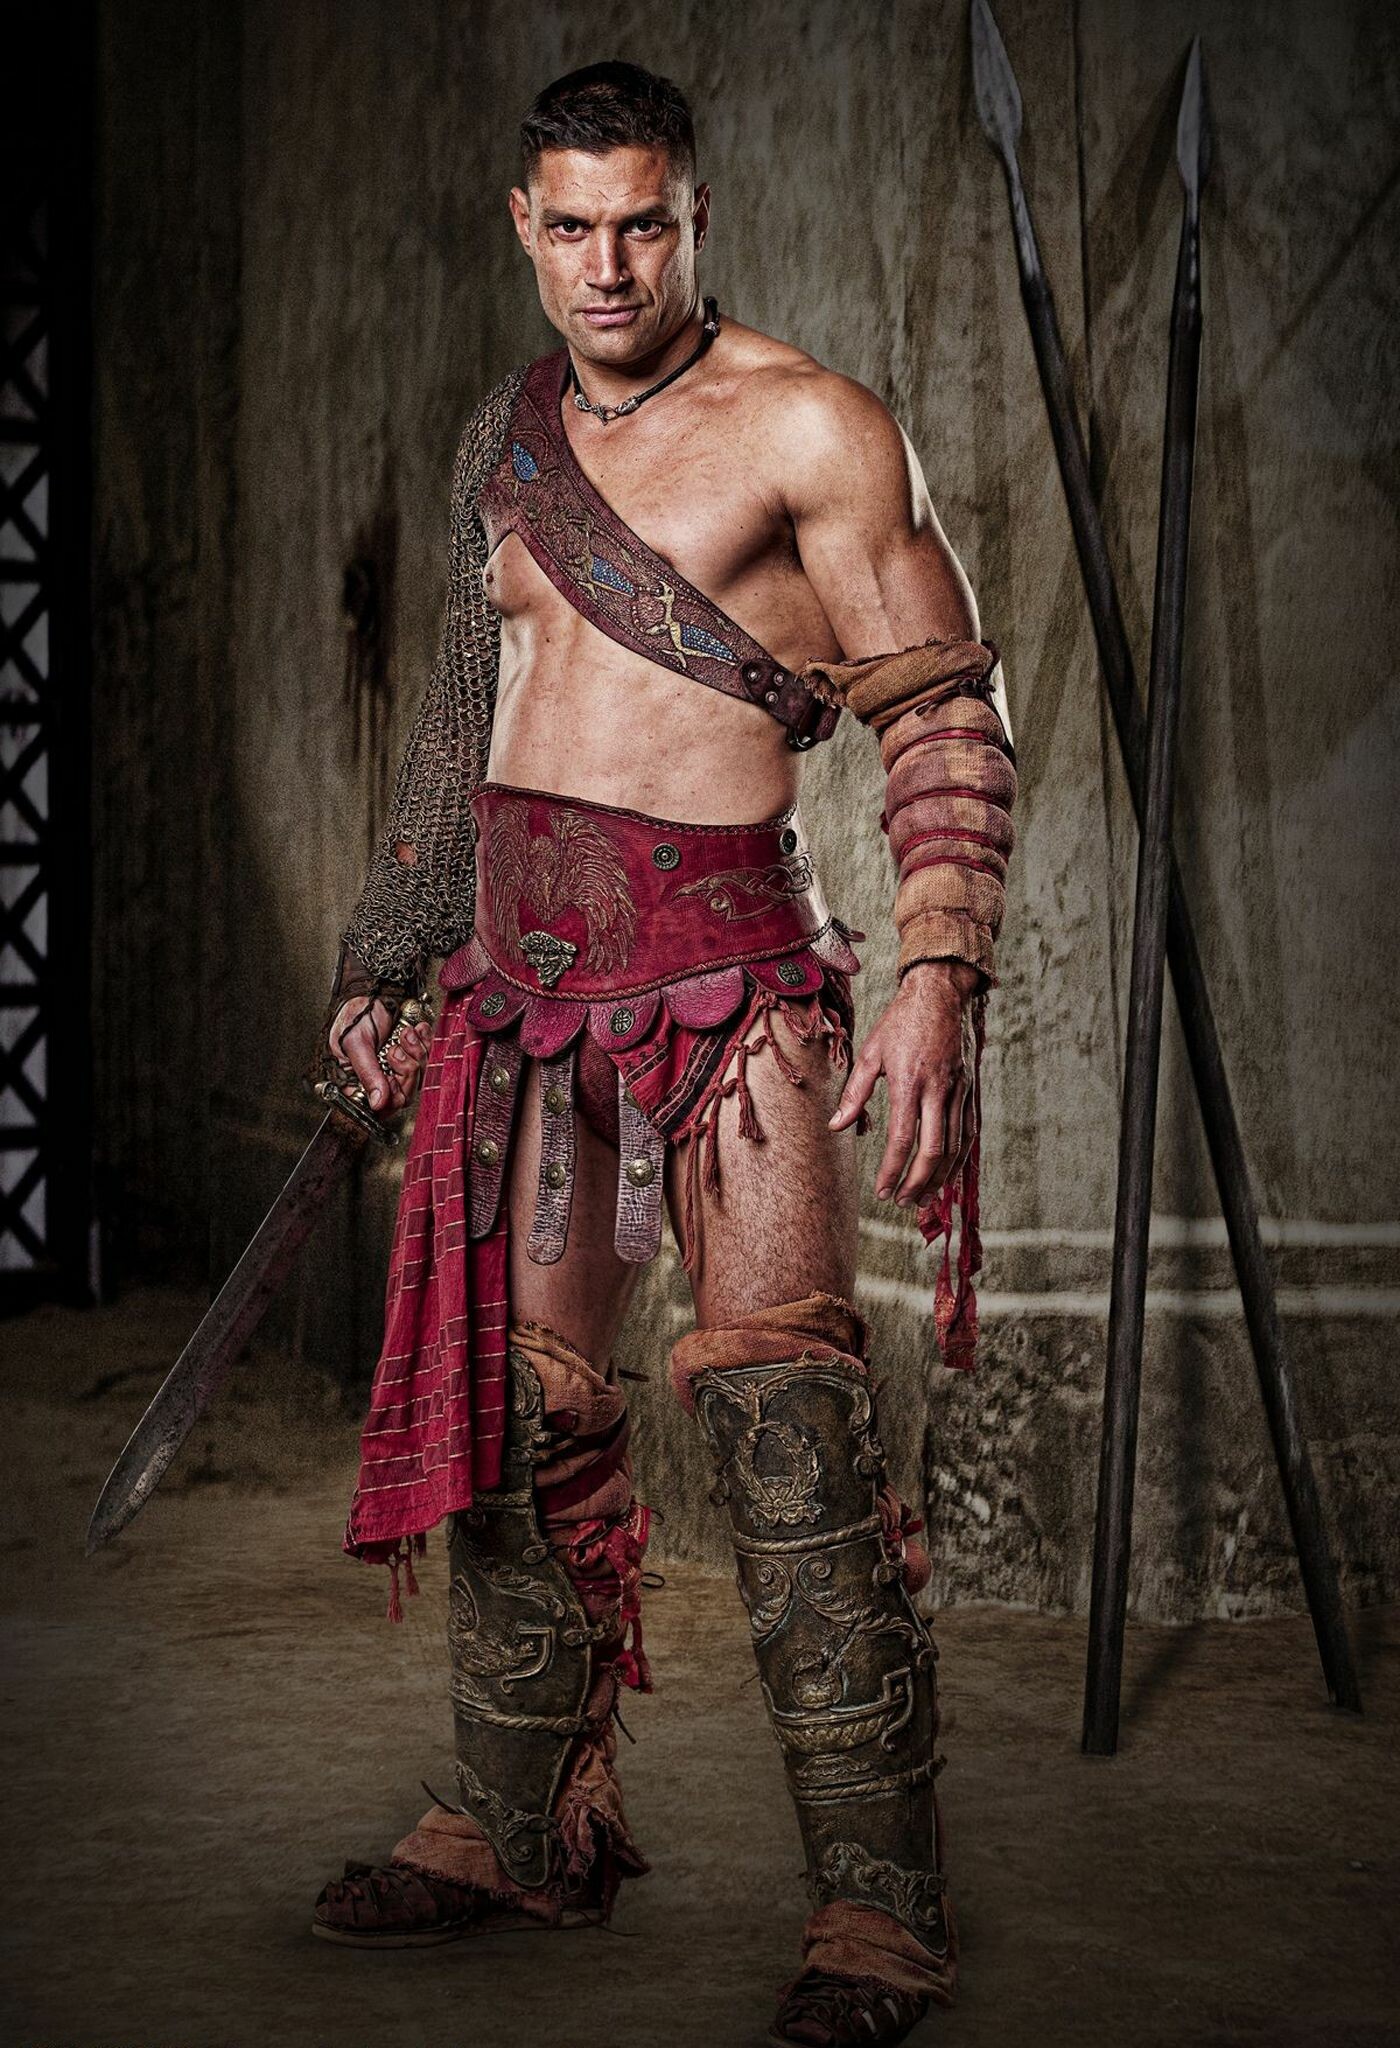 HD wallpaper, Samsung Hd Spartacus Gods Of The Arena Wallpaper, 1400X2050 Hd Phone, Memorable Performances, Favorite Characters, Compelling Portrayals, Male Tv Icons